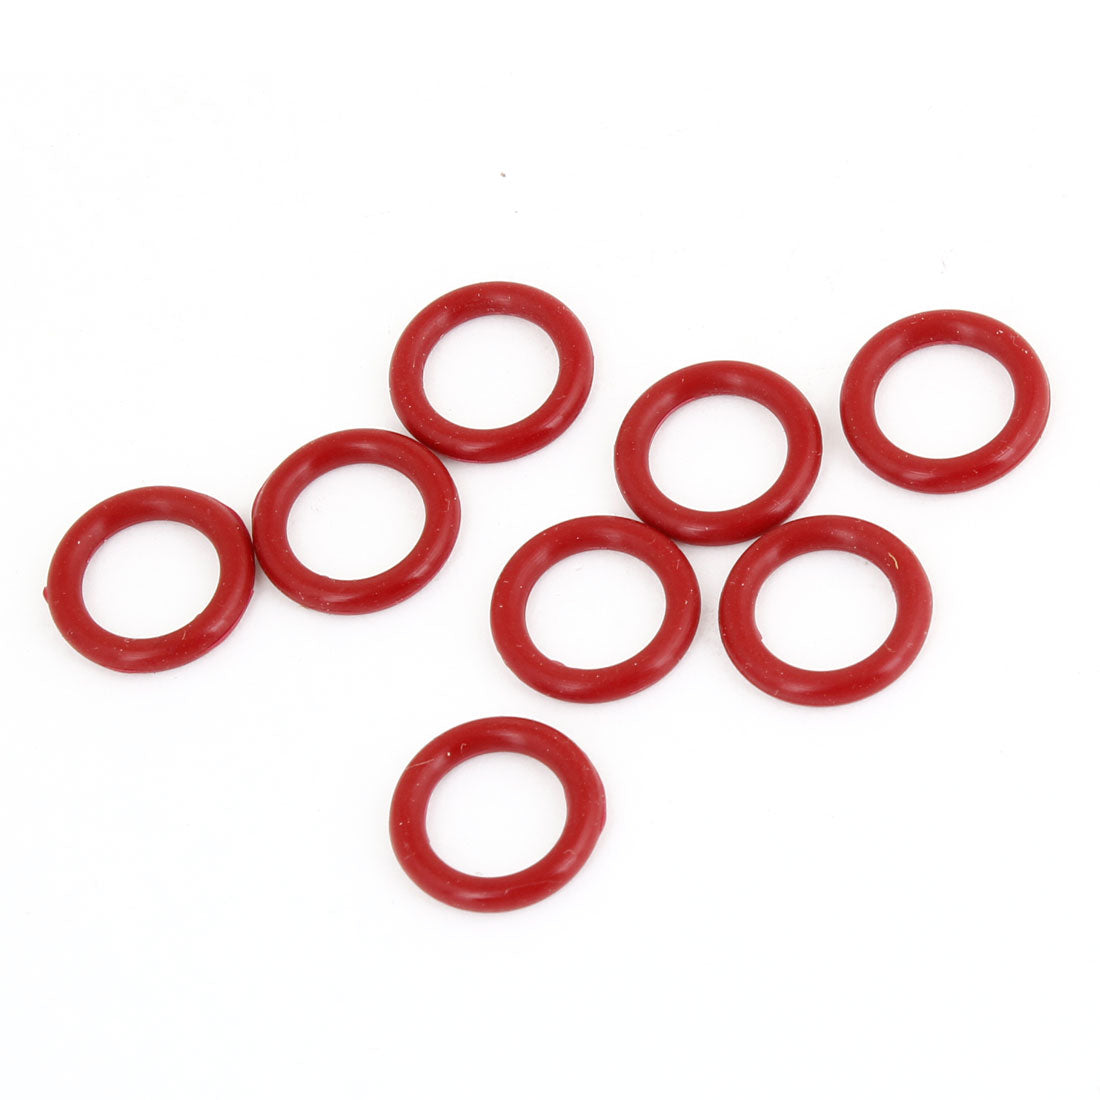 uxcell Uxcell 8 Pcs 15mm Outside Dia 2.5mm Thickness Industrial Rubber O Rings Seals